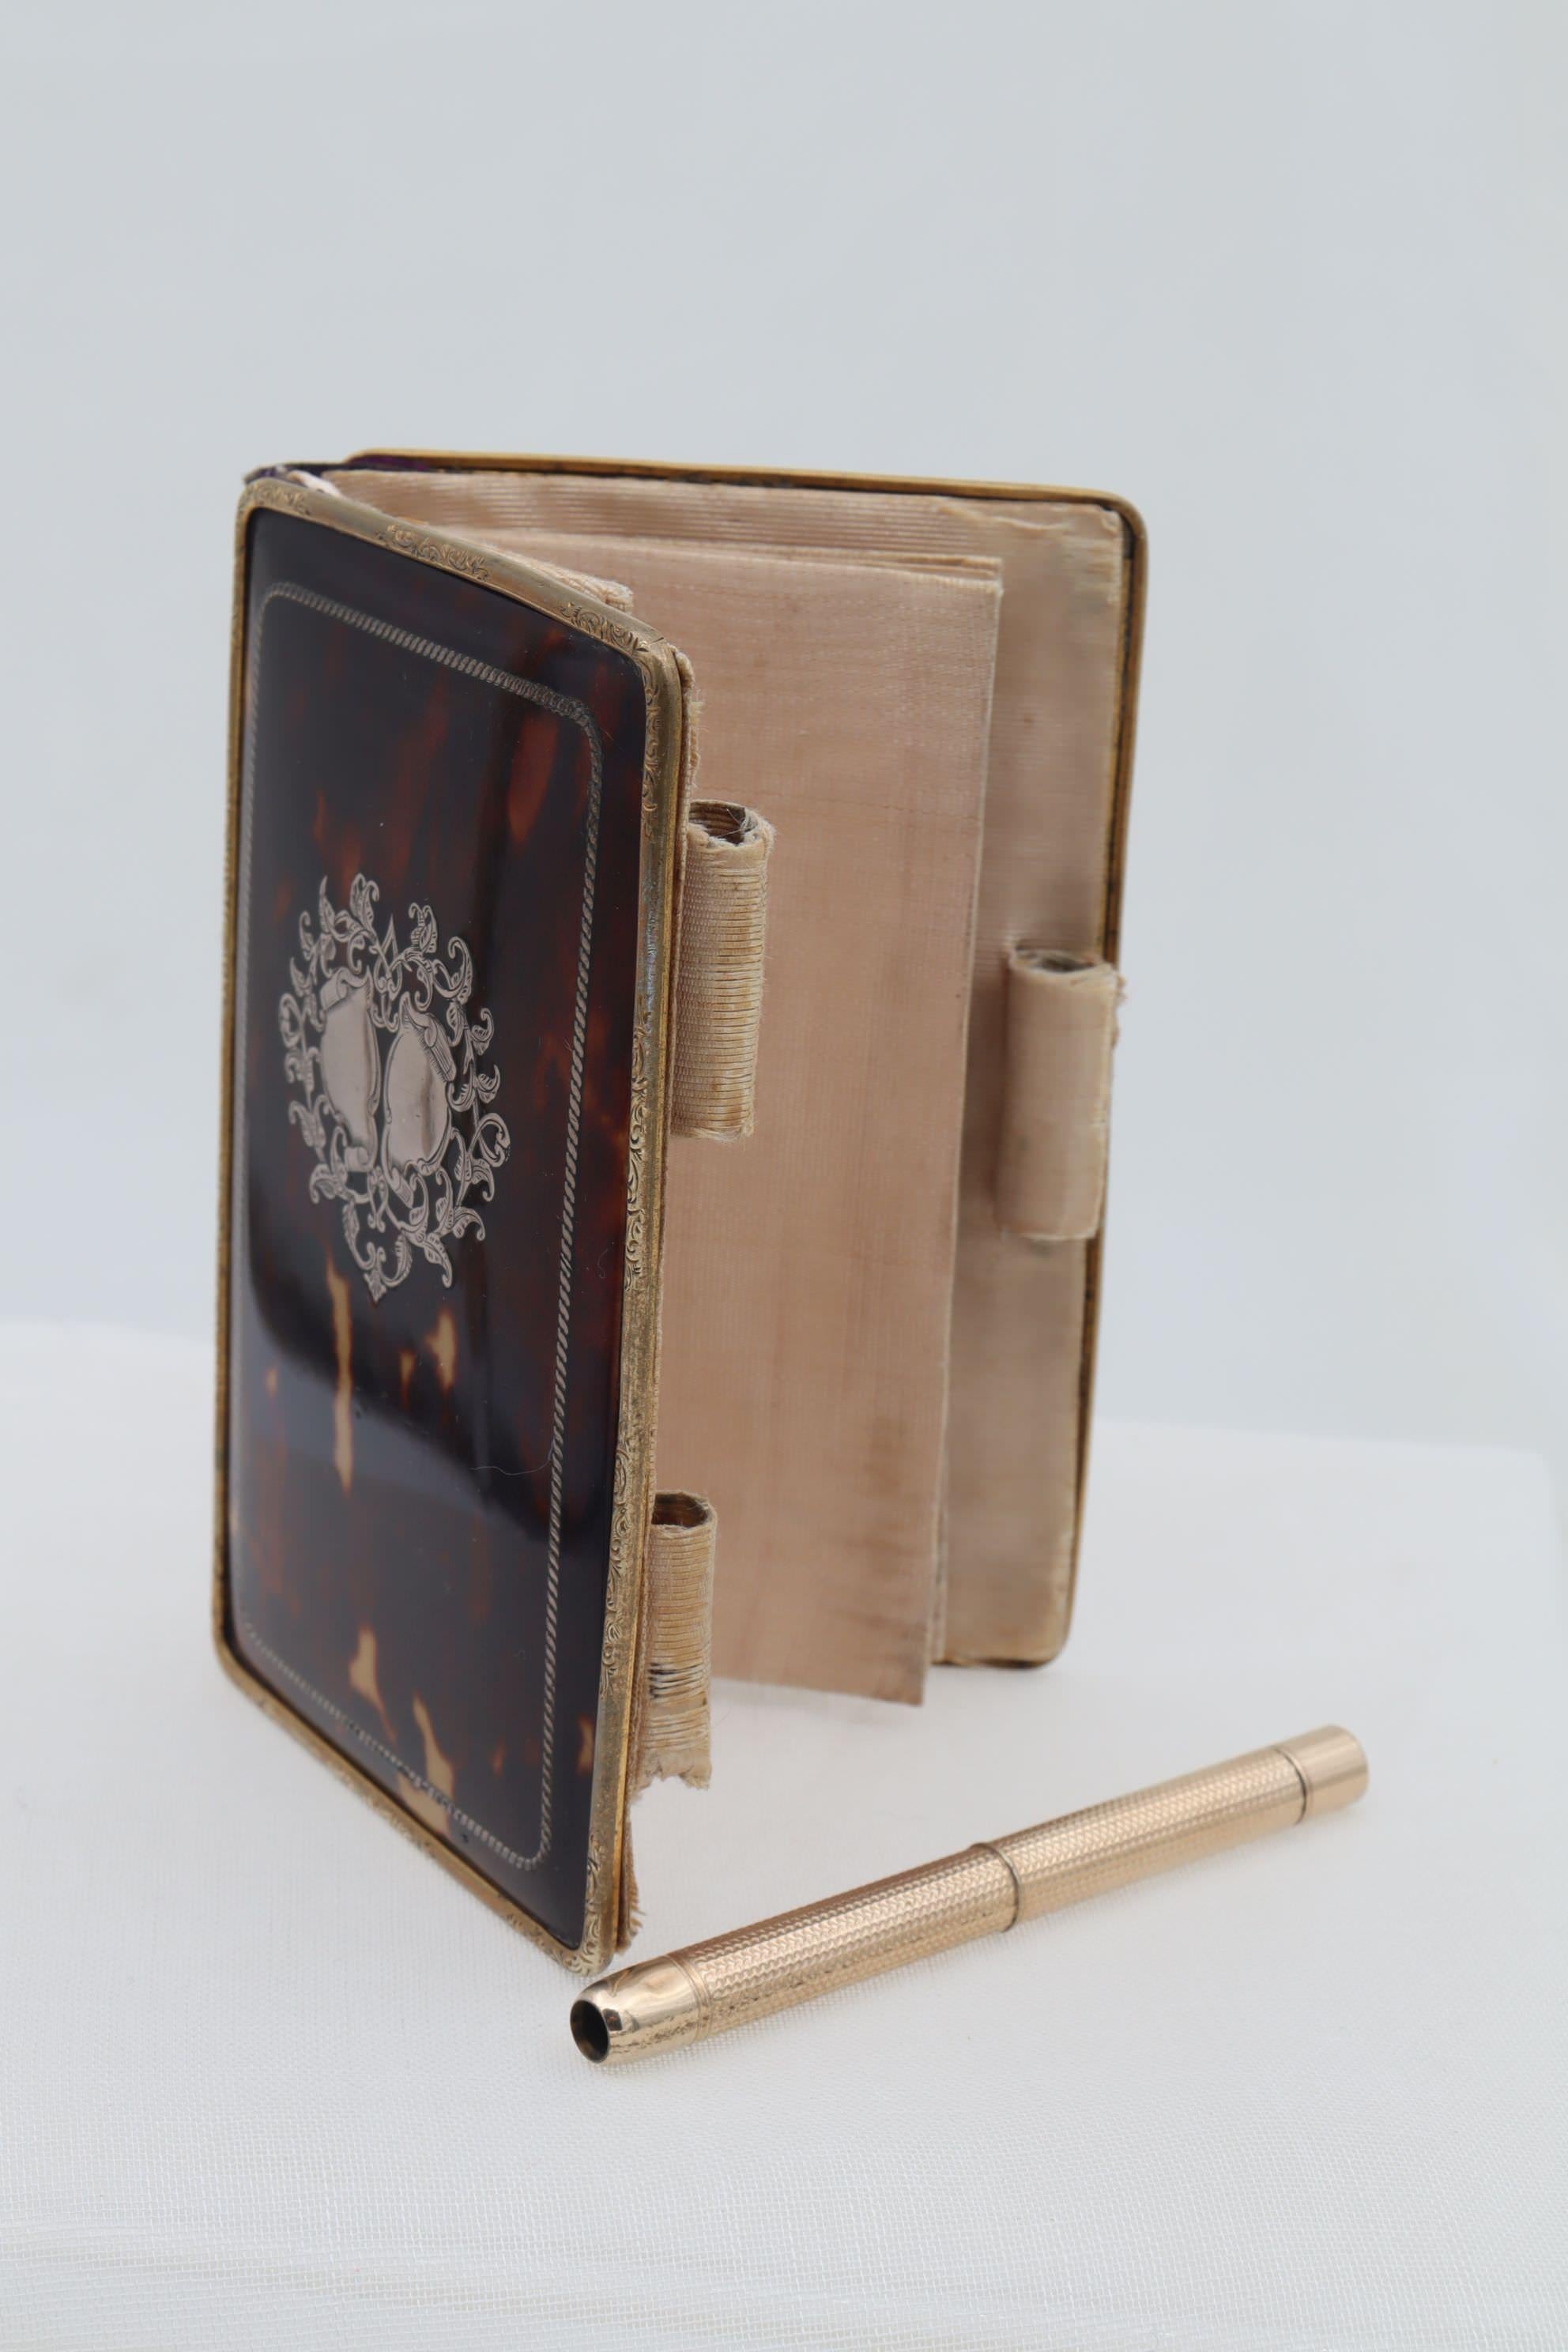 The front and rear tortoiseshell covers of this very good quality ladies aide memoire are held within an engraved gold frame. Inlaid to both covers is a rectangle of twisted silver wire giving a rope like frame and the front cover carries two silver